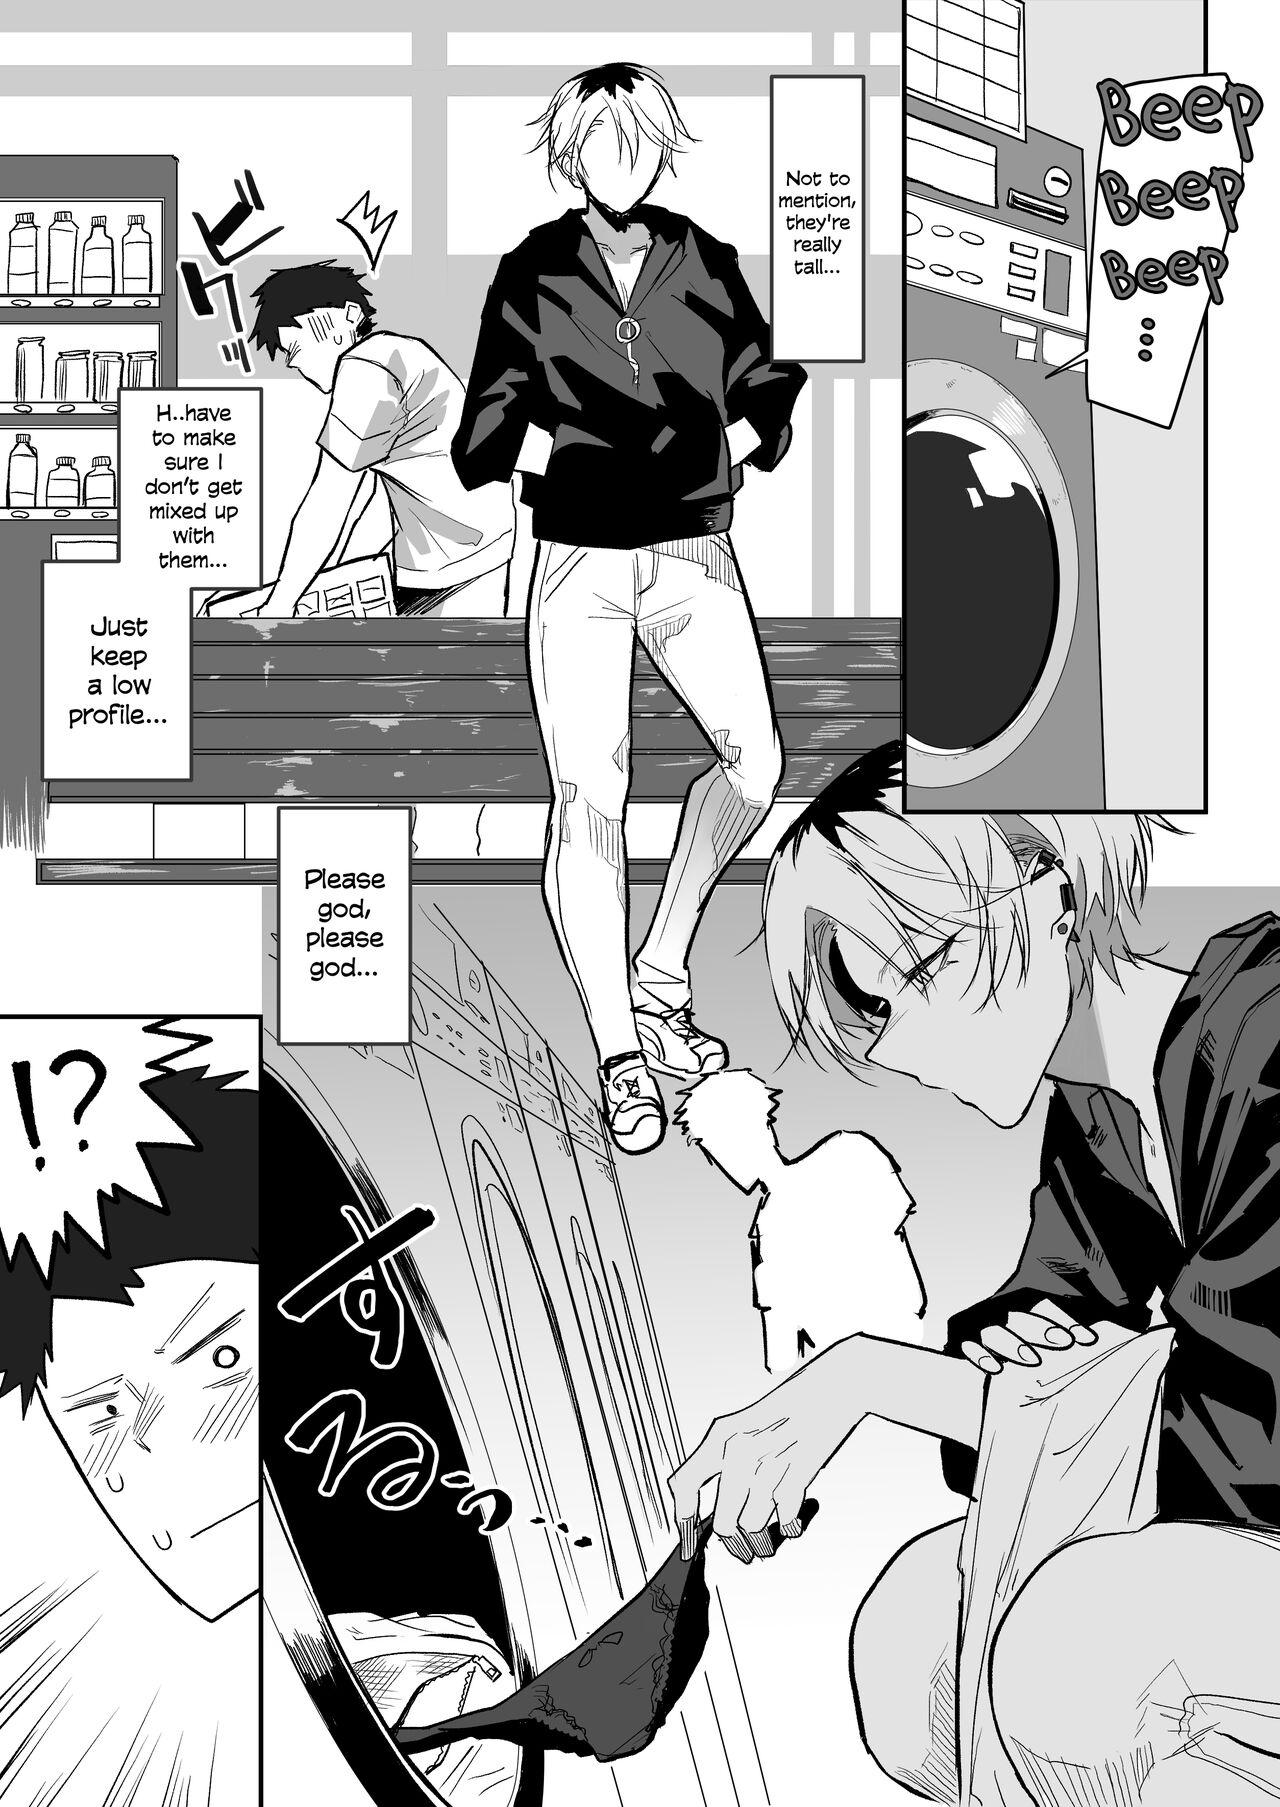 Parody Coin Laundry de Kowai Yankee ni Karamareru Manga | A Manga About Getting Mixed Up With A Scary Delinquent At The Laundromat - Original Fuck For Money - Page 2